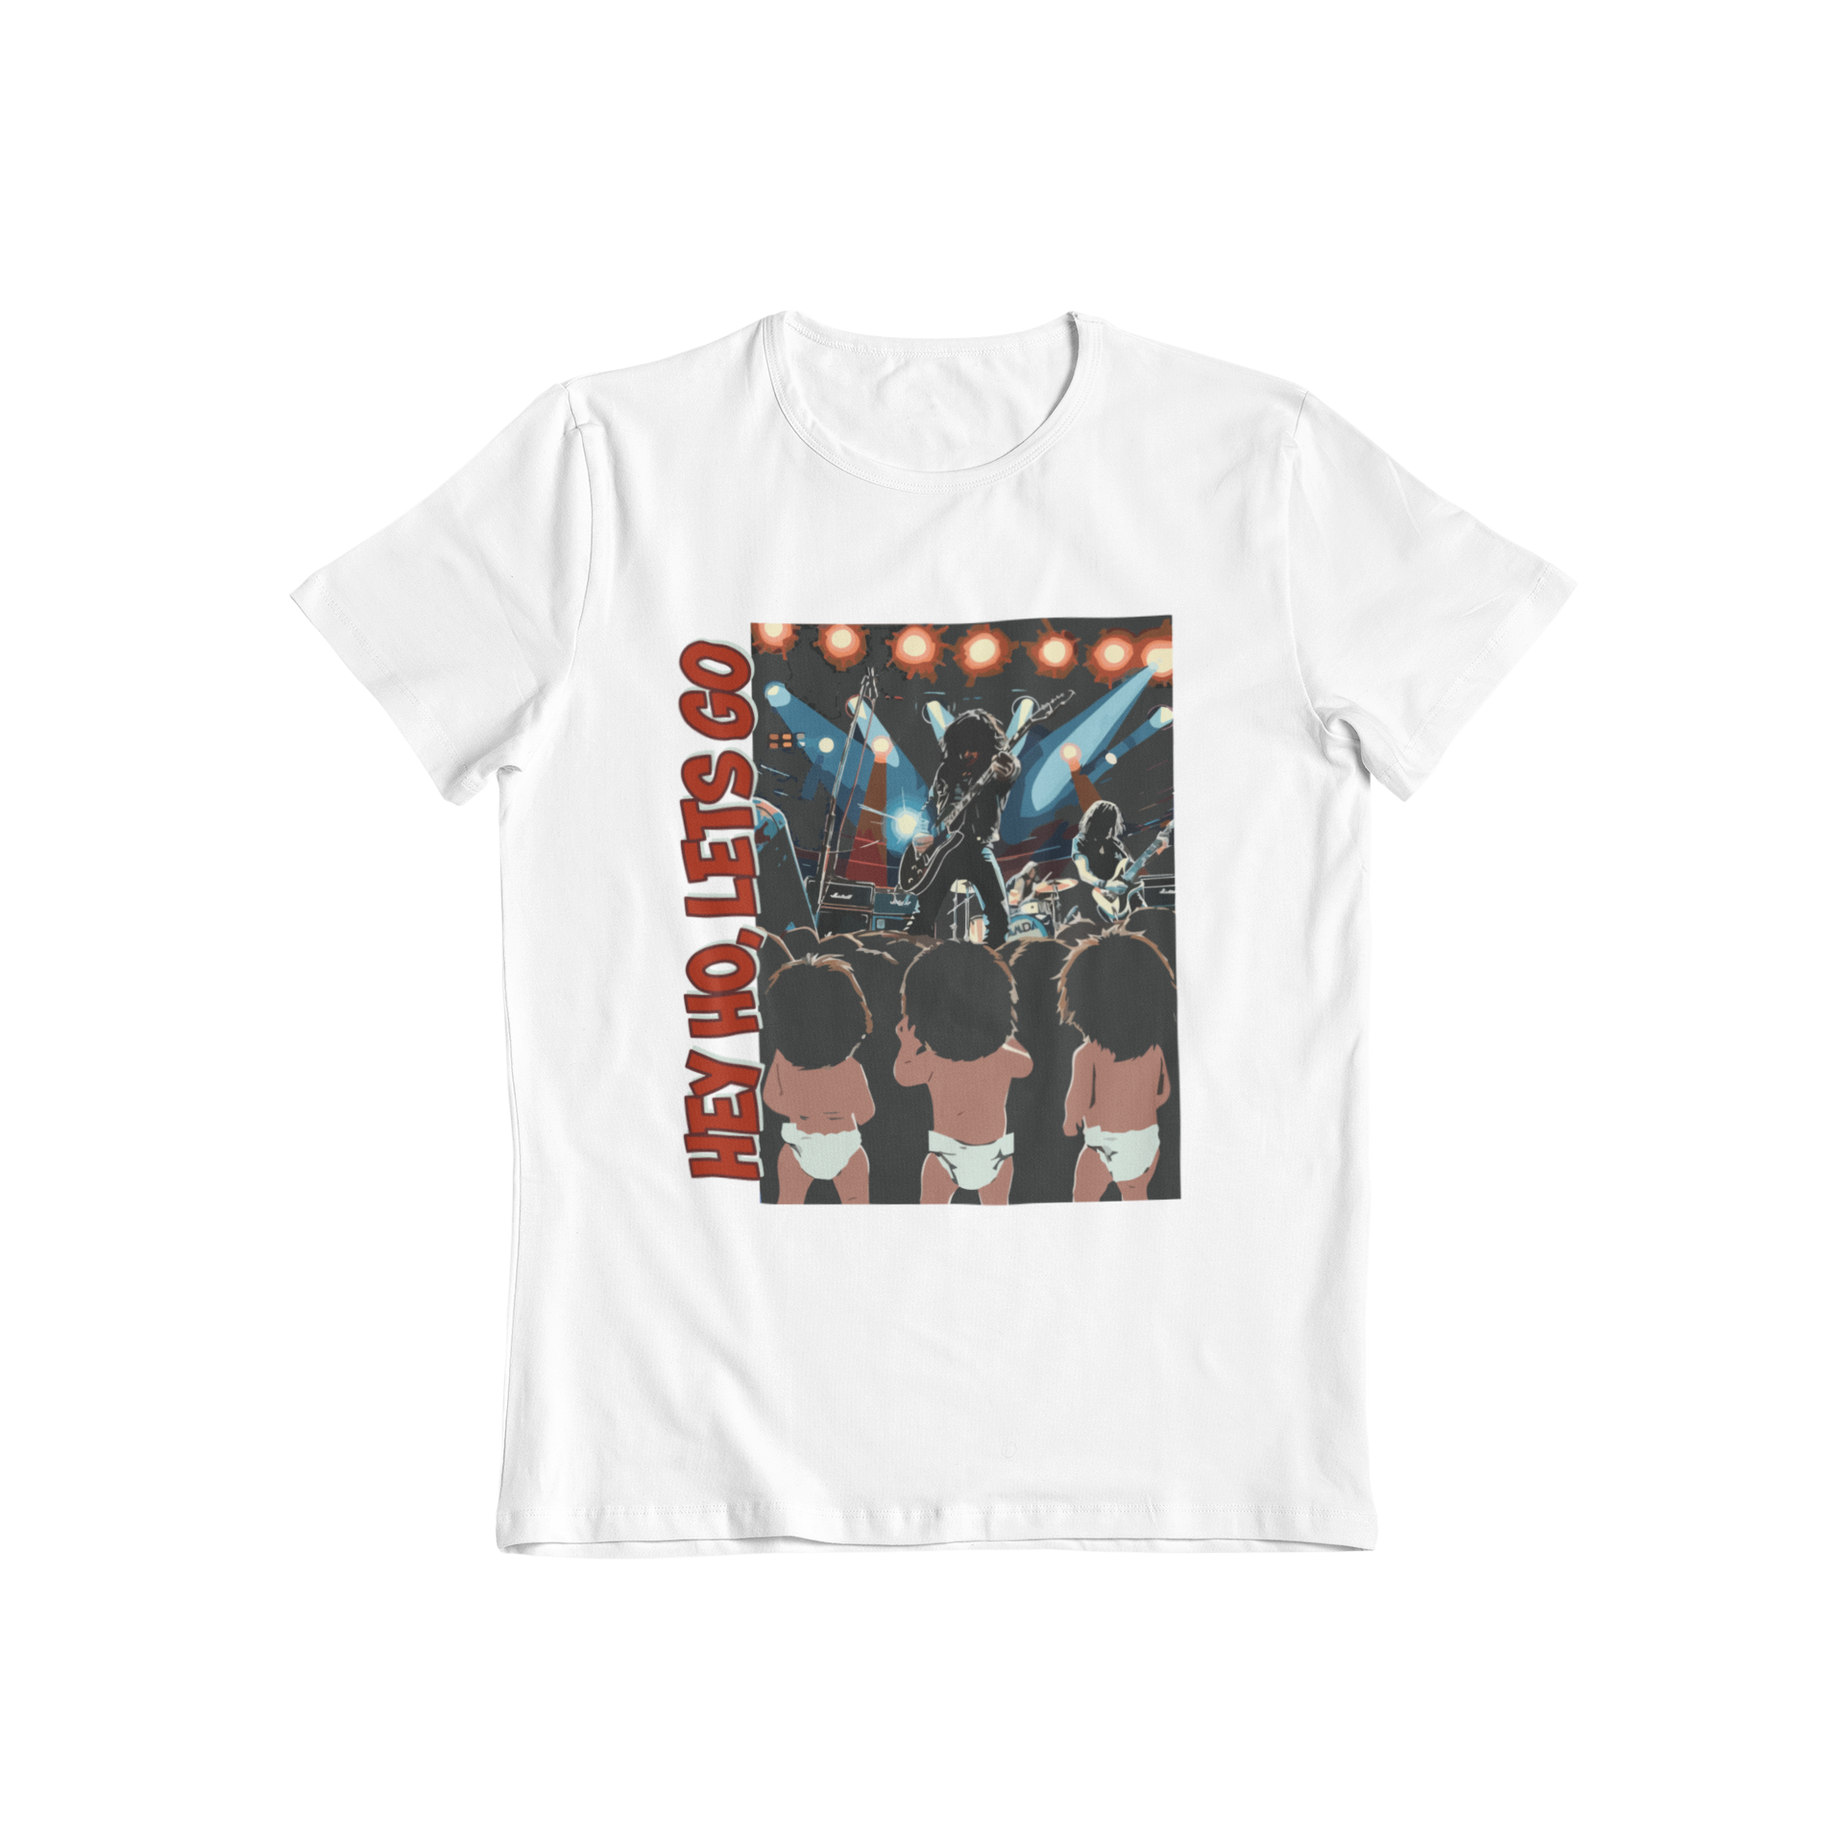 Rev up your wardrobe with the Hey Ho, Lets Go T-shirt! Featuring the iconic graphics from the Ramones classic song, this t-shirt is perfect for the rockstar in you. Get ready to rock and roll (in style) with this classic and playful t-shirt.